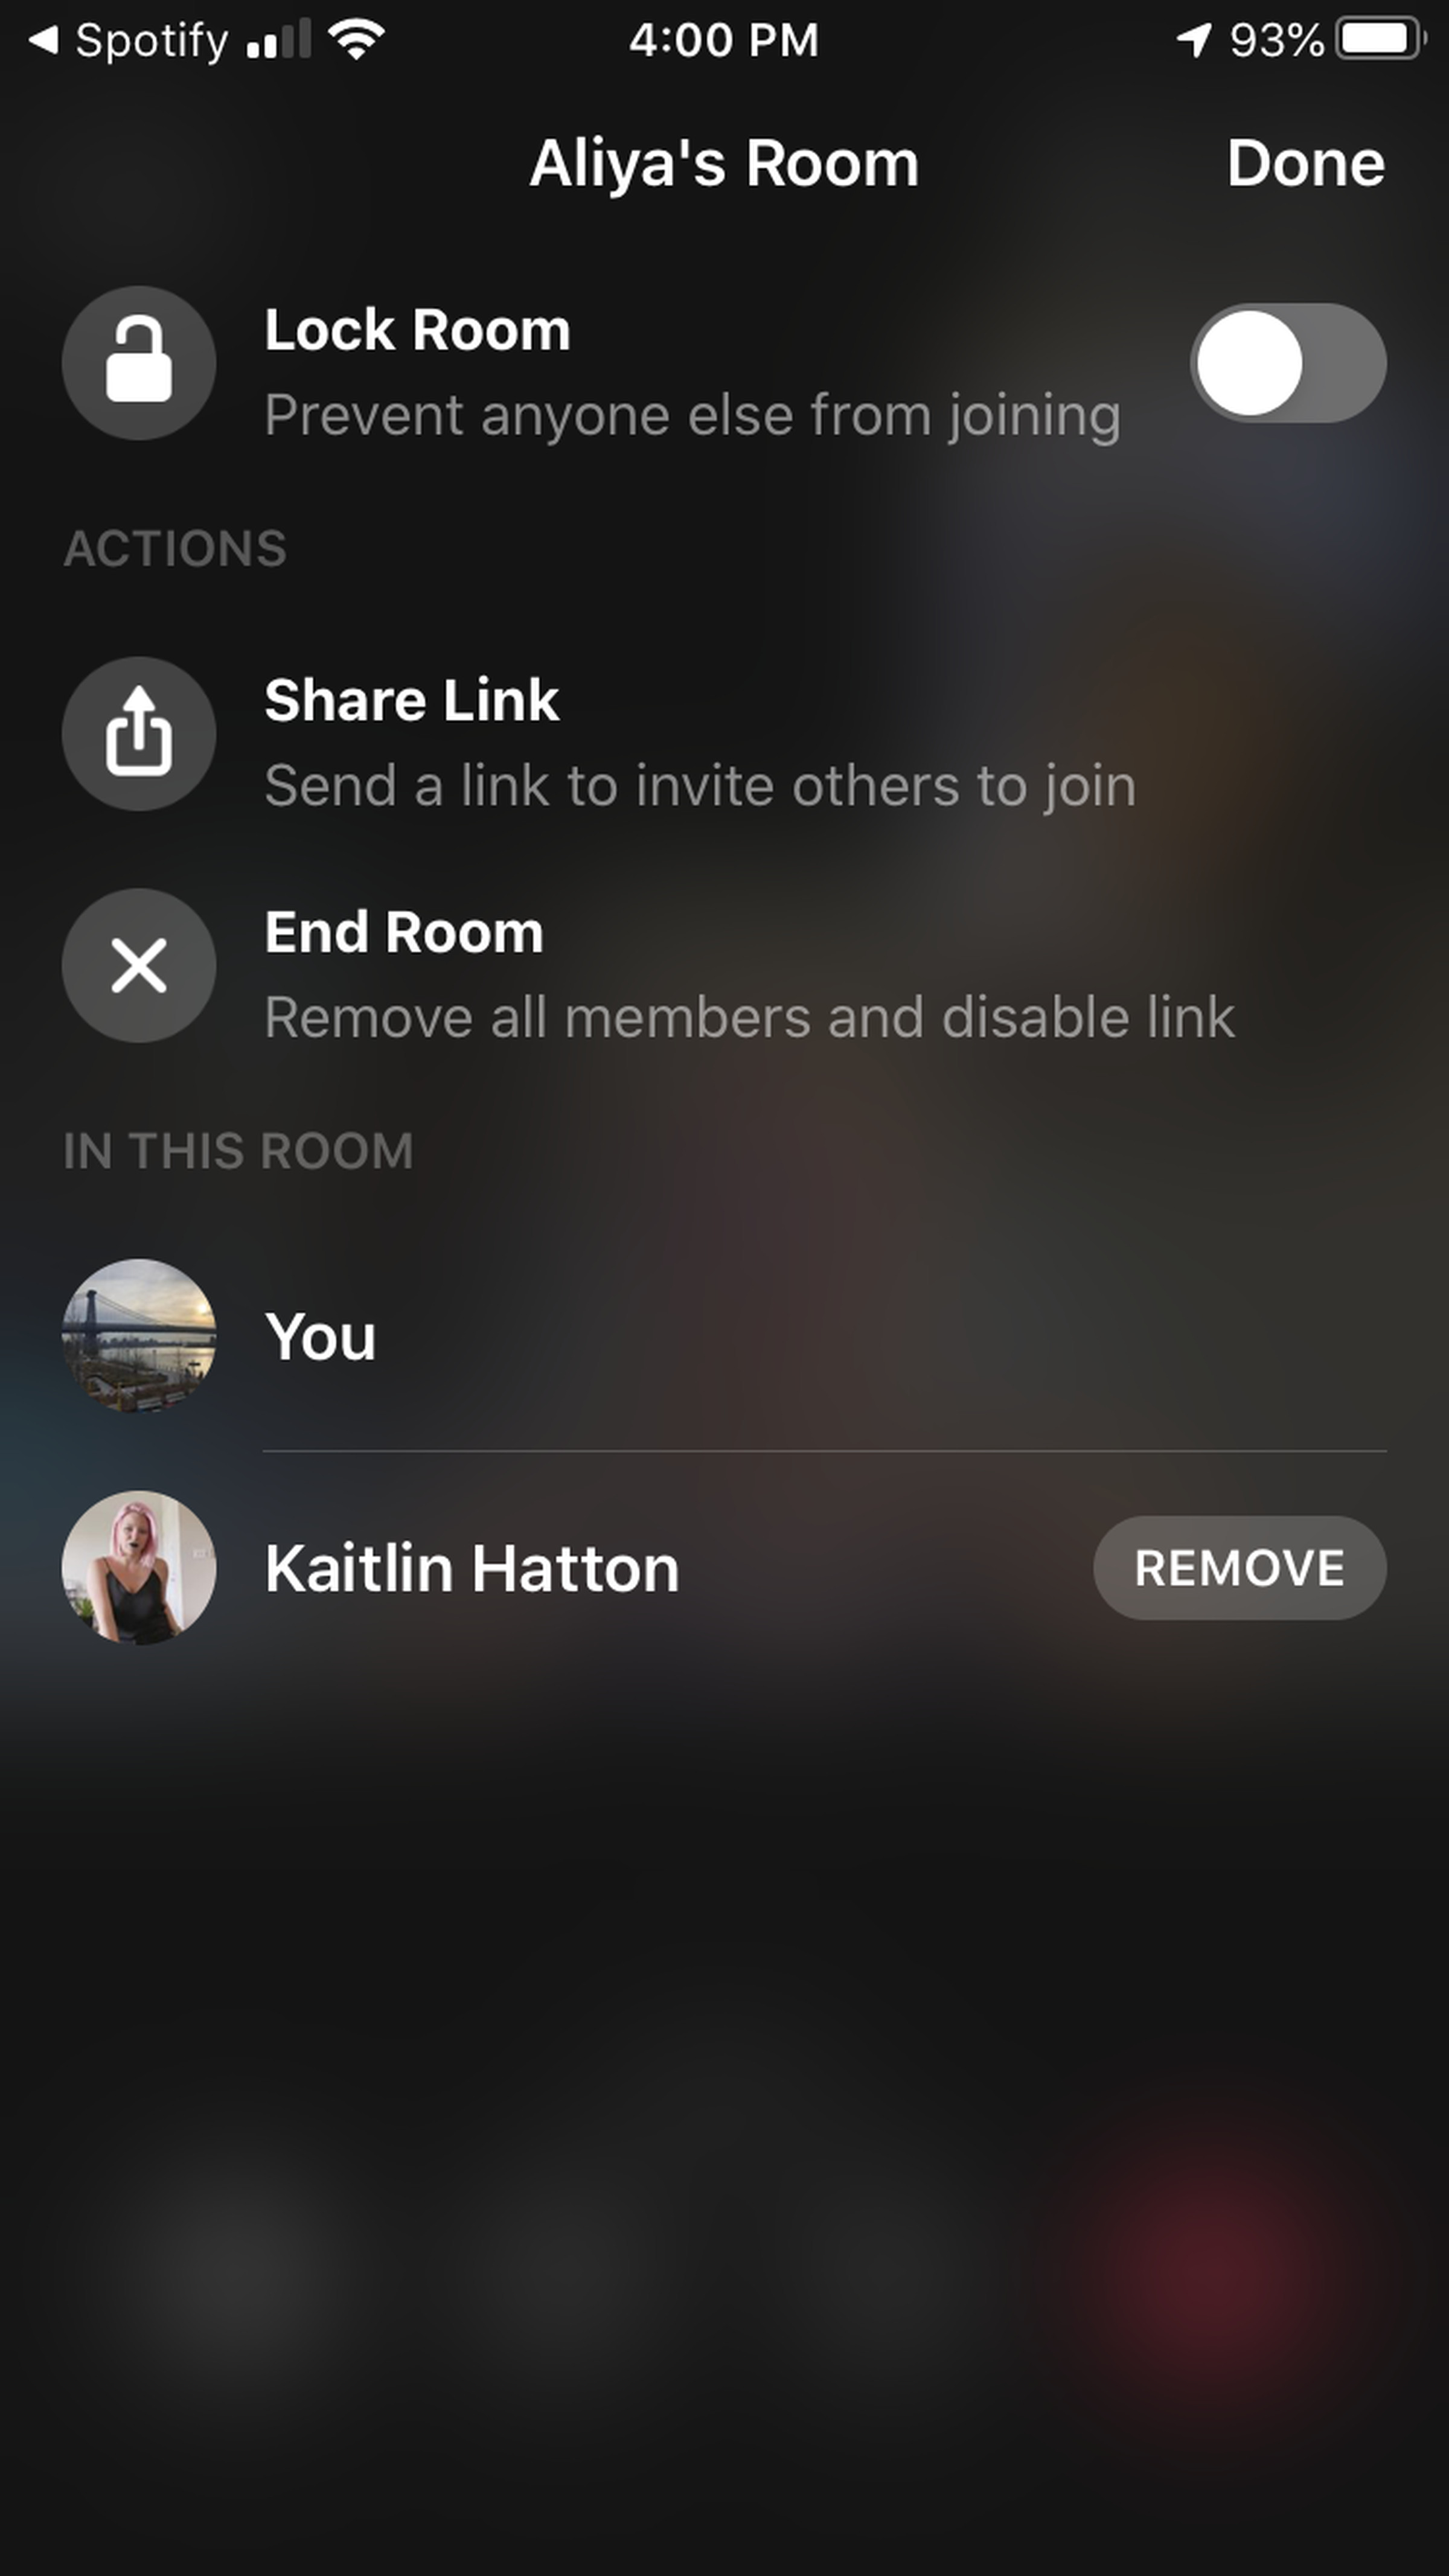 You’ll see options allowing you to lock the room, share the link for the room, and end the room. At the bottom, you’ll see who’s on the call, with a “Remove” button next to the other participants.